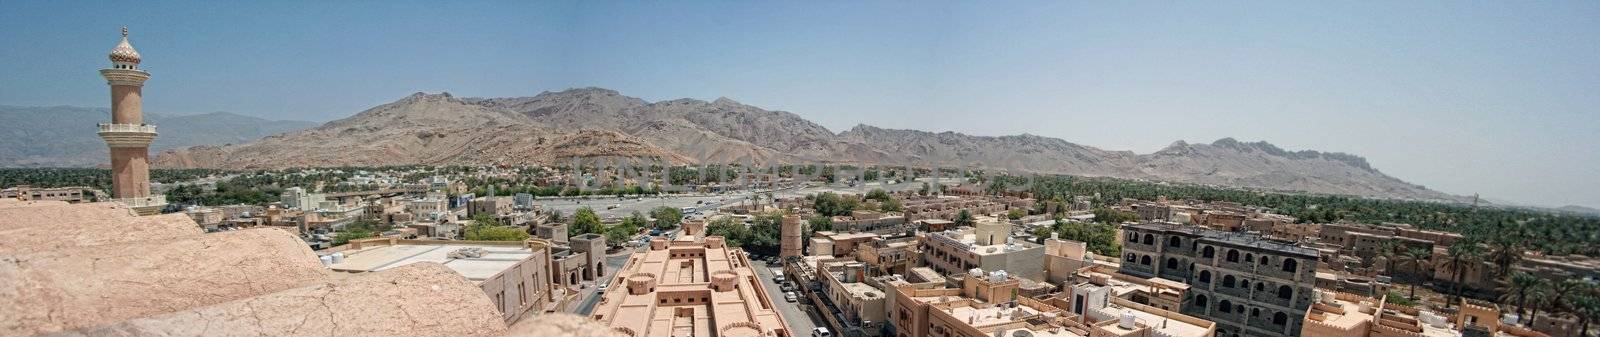 Architecture Detail of Nizwa, Oman, Middle East